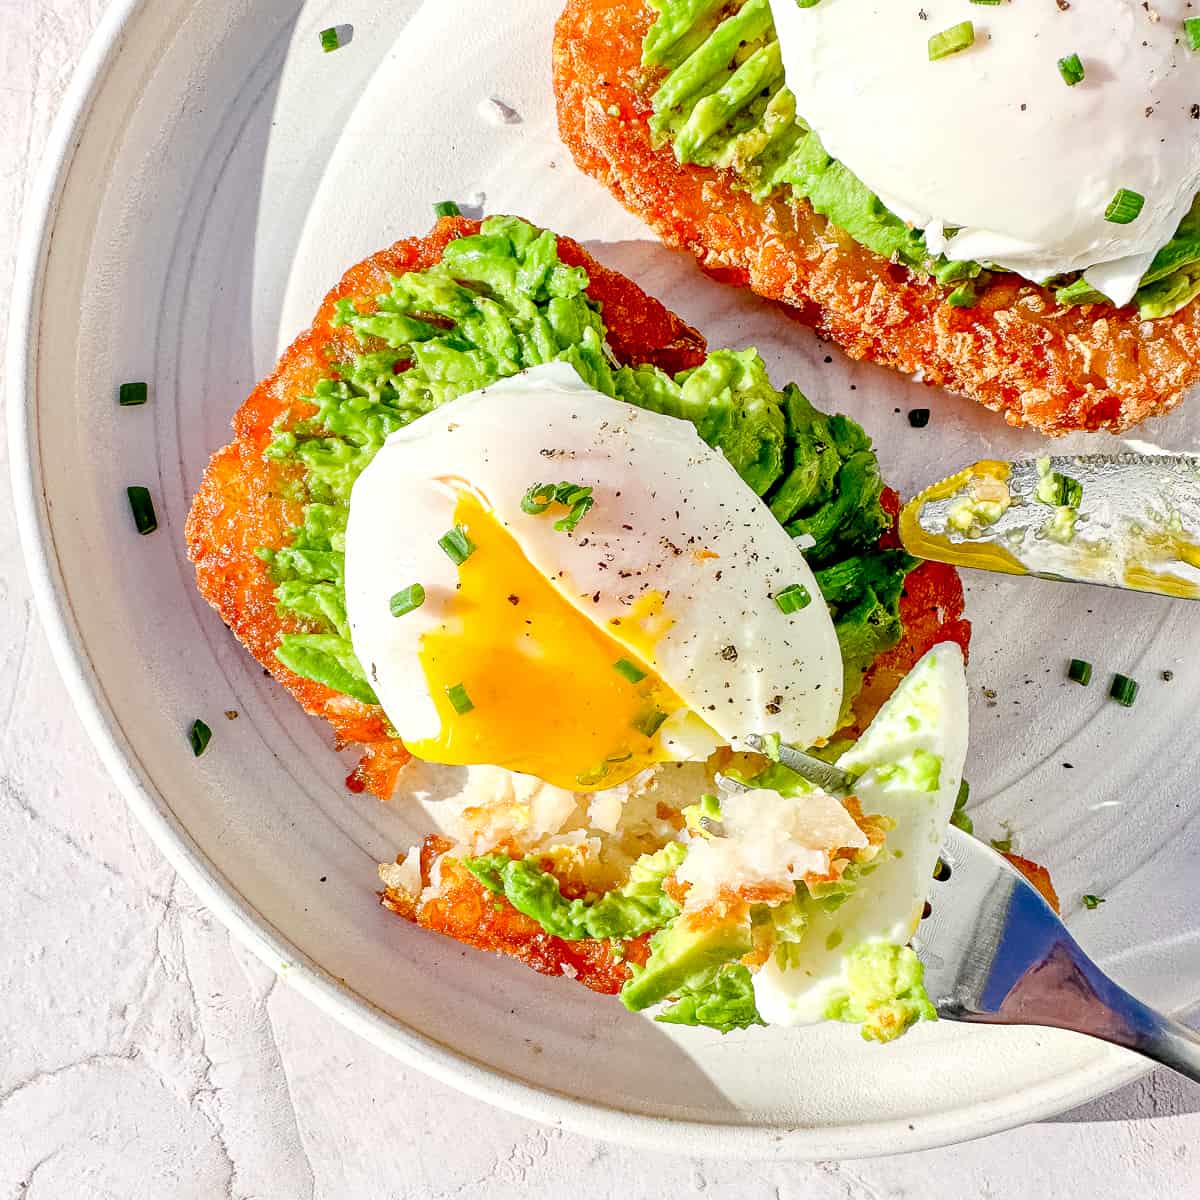 cutting into poached egg on top of hash brown patty with avocado.